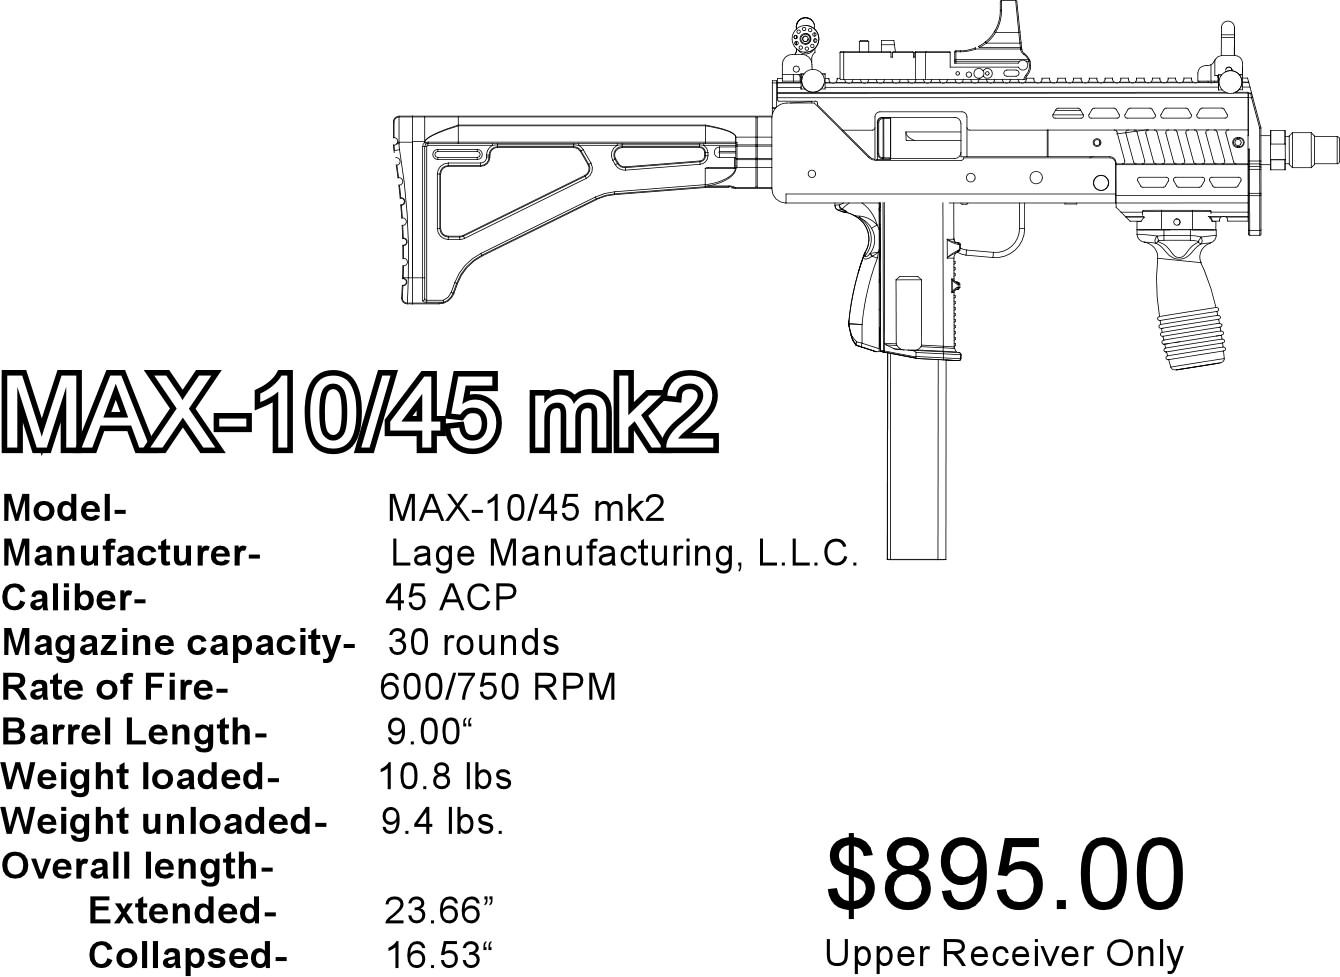 Please Tell Me More About The Lage Max 10/9 MK2 Upper